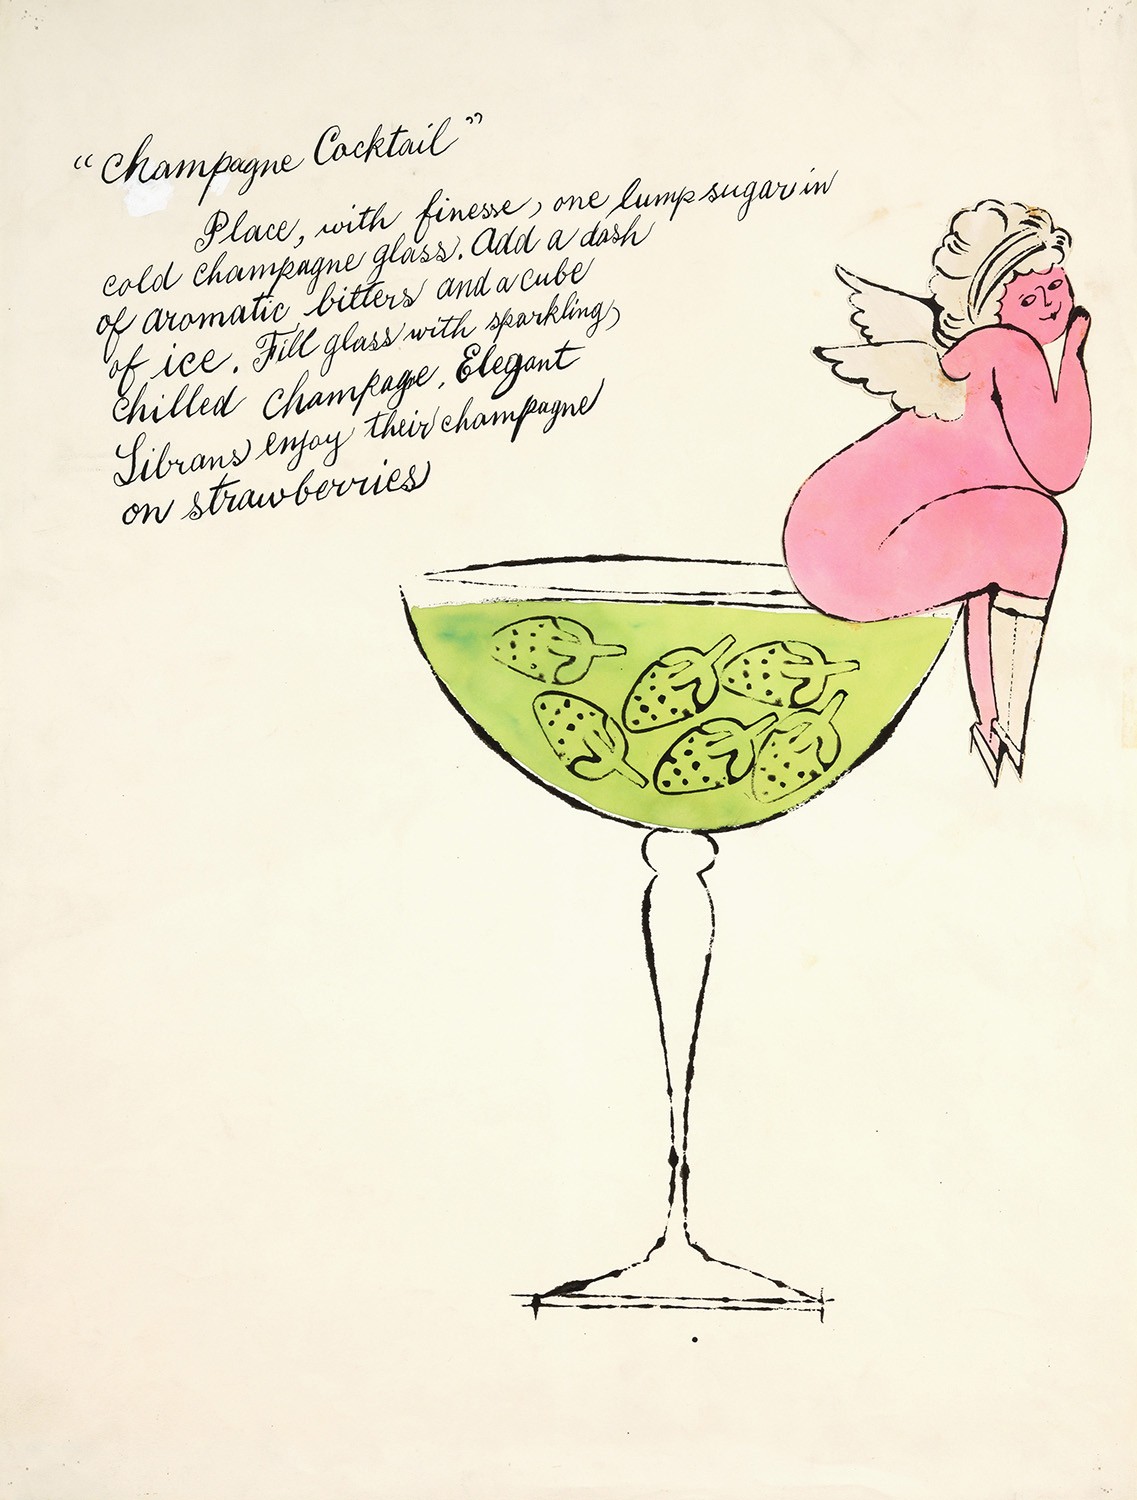 A pink cherub sits on the edge of a cocktail glass filled with green liquid and strawberries. In the top left corner, a cocktail recipe is written in old-fashioned handwriting.